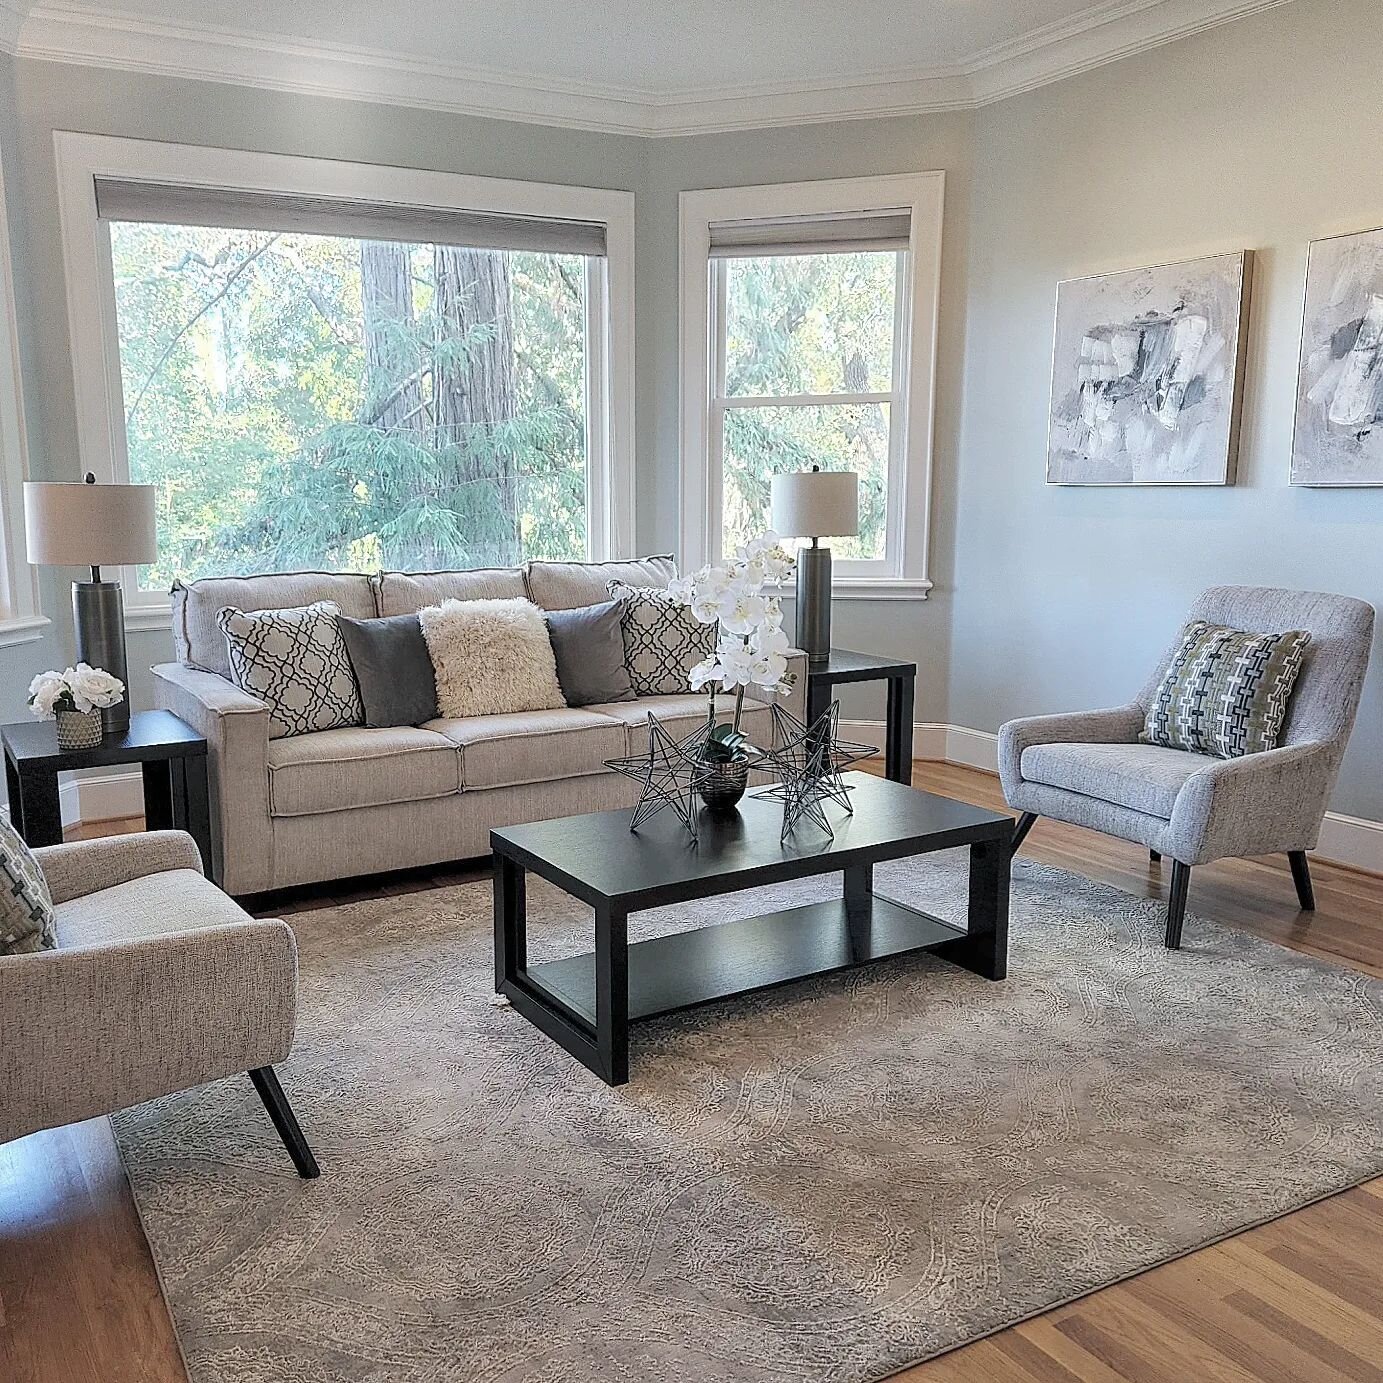 Coming soon-This spacious home in prestigious Los Gatos boasts 3 Living Room spaces and a large basement! 

#365staging #staging #stager #staginghomes #losgatos #losgatoshomes #realtor #realestate #realestateagent #interiordecorating #interiordecorat